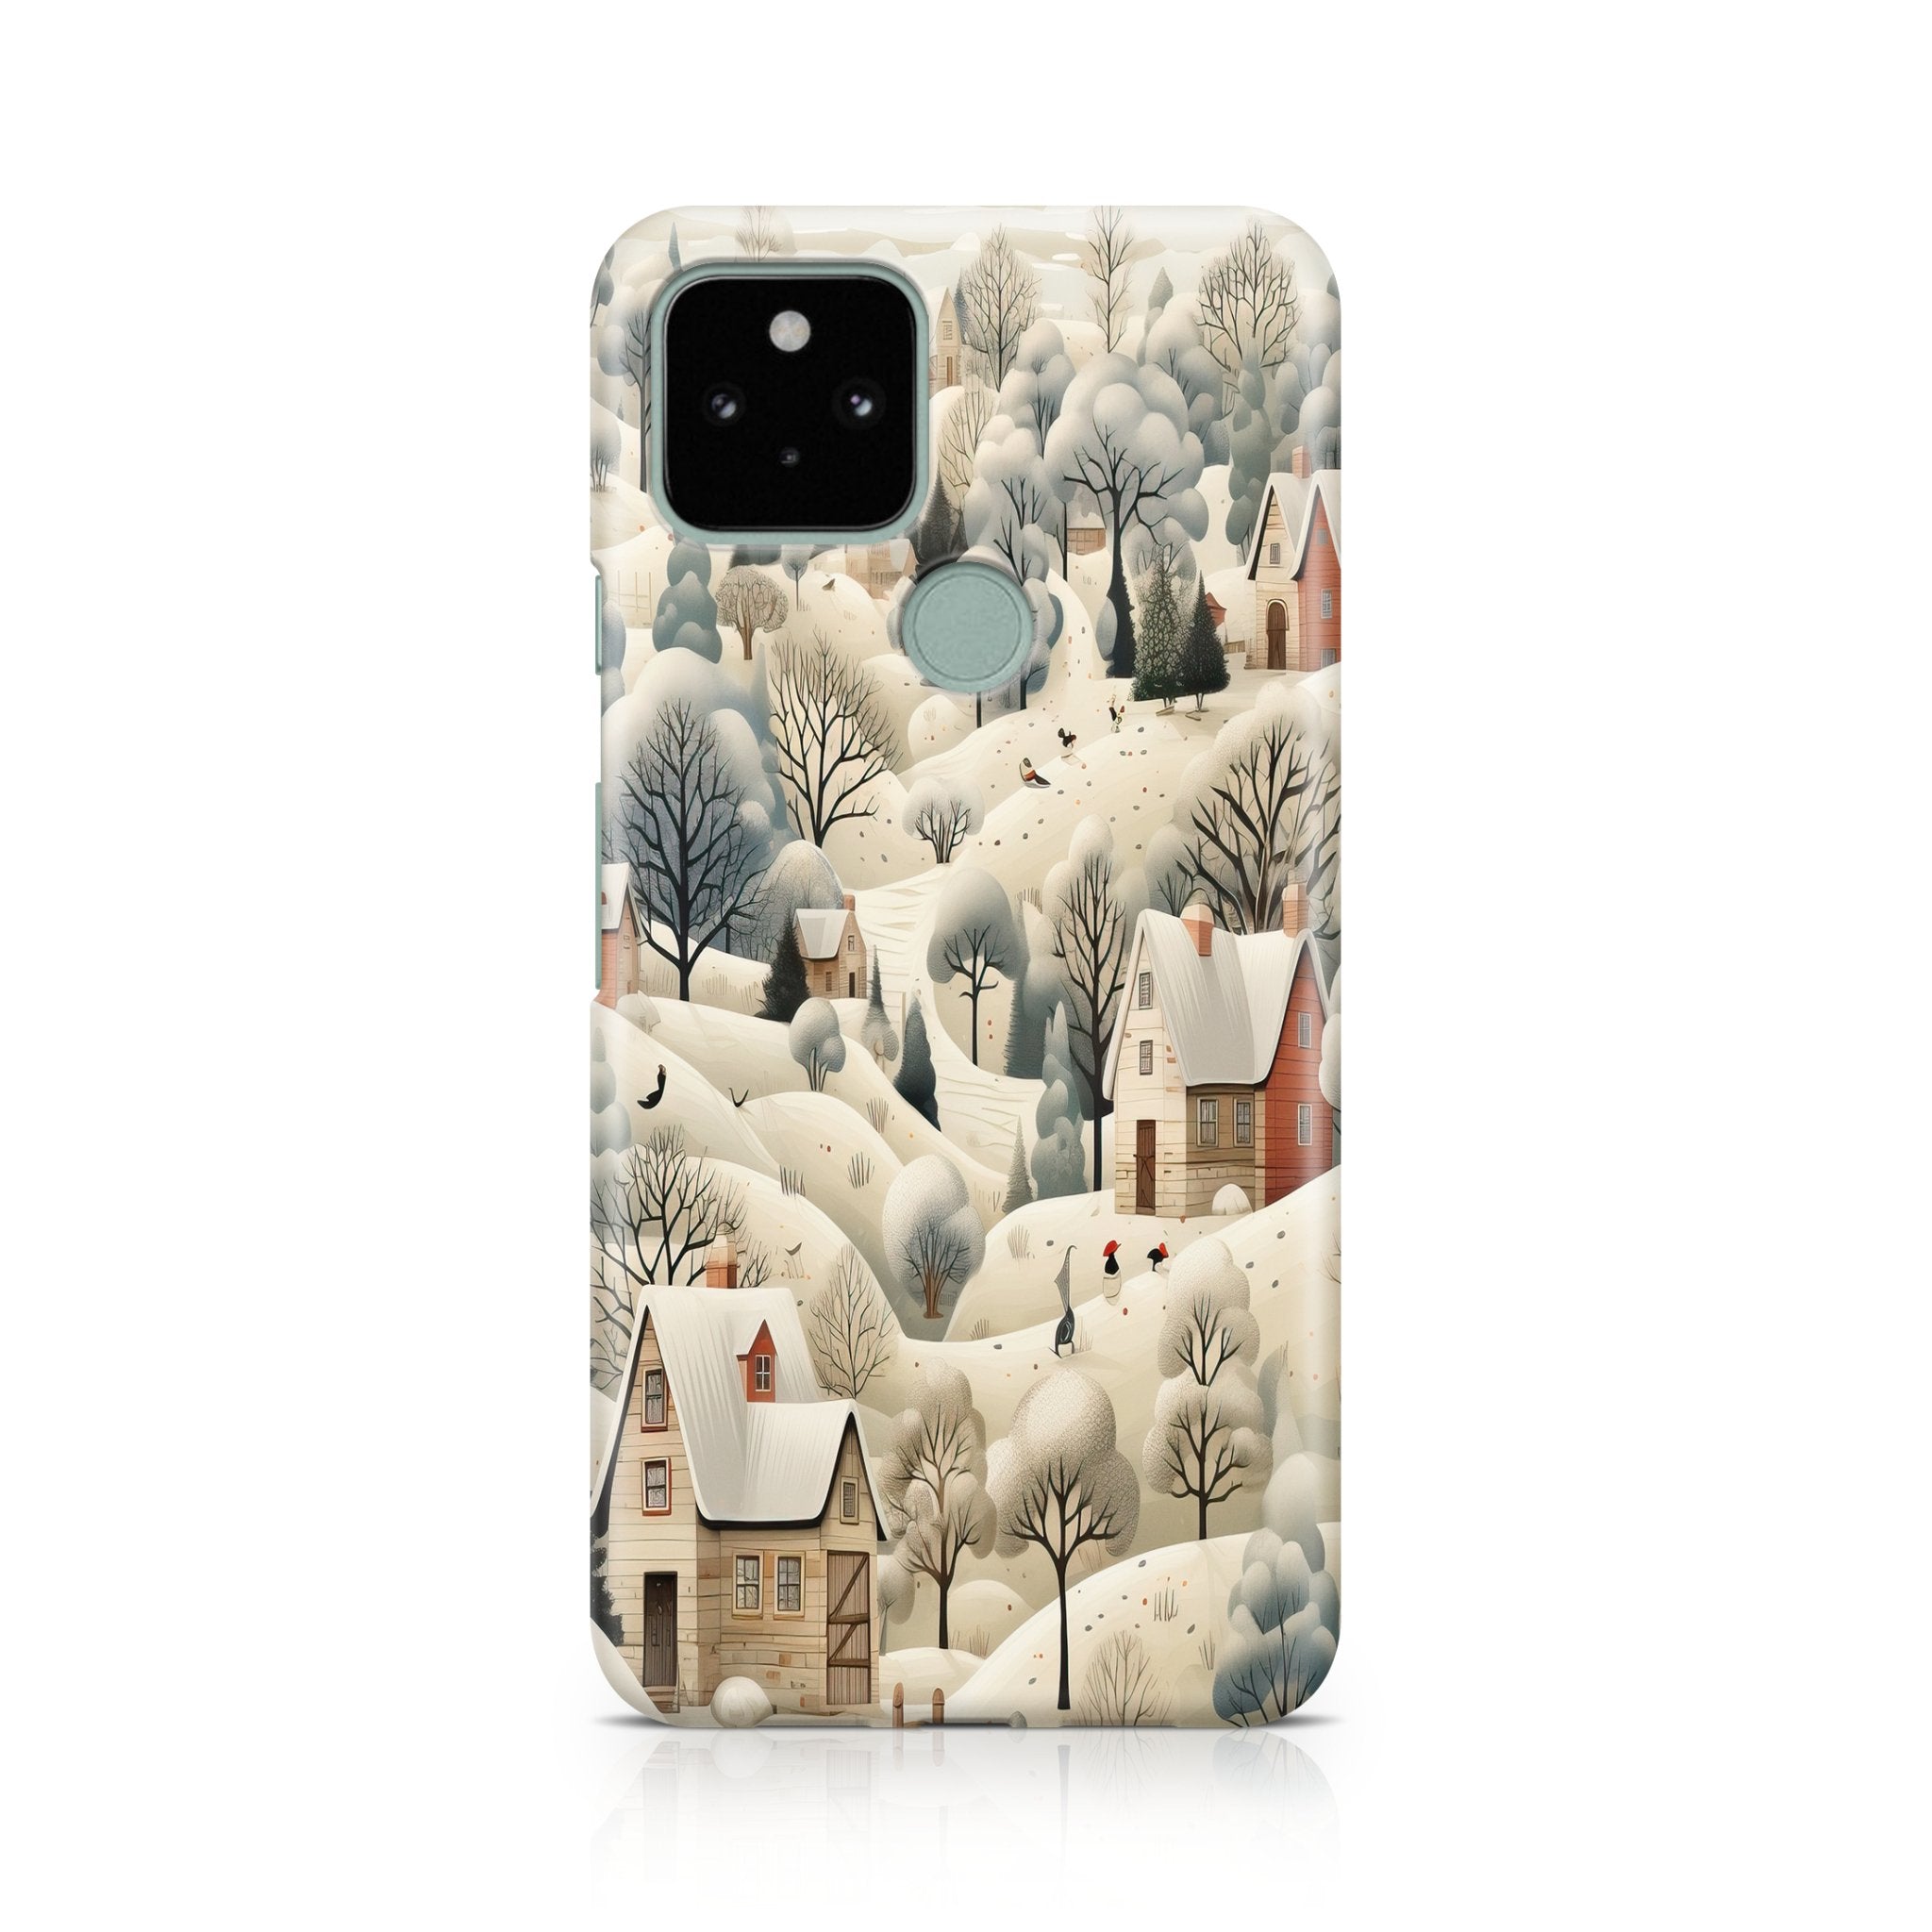 Snow Day - Google phone case designs by CaseSwagger